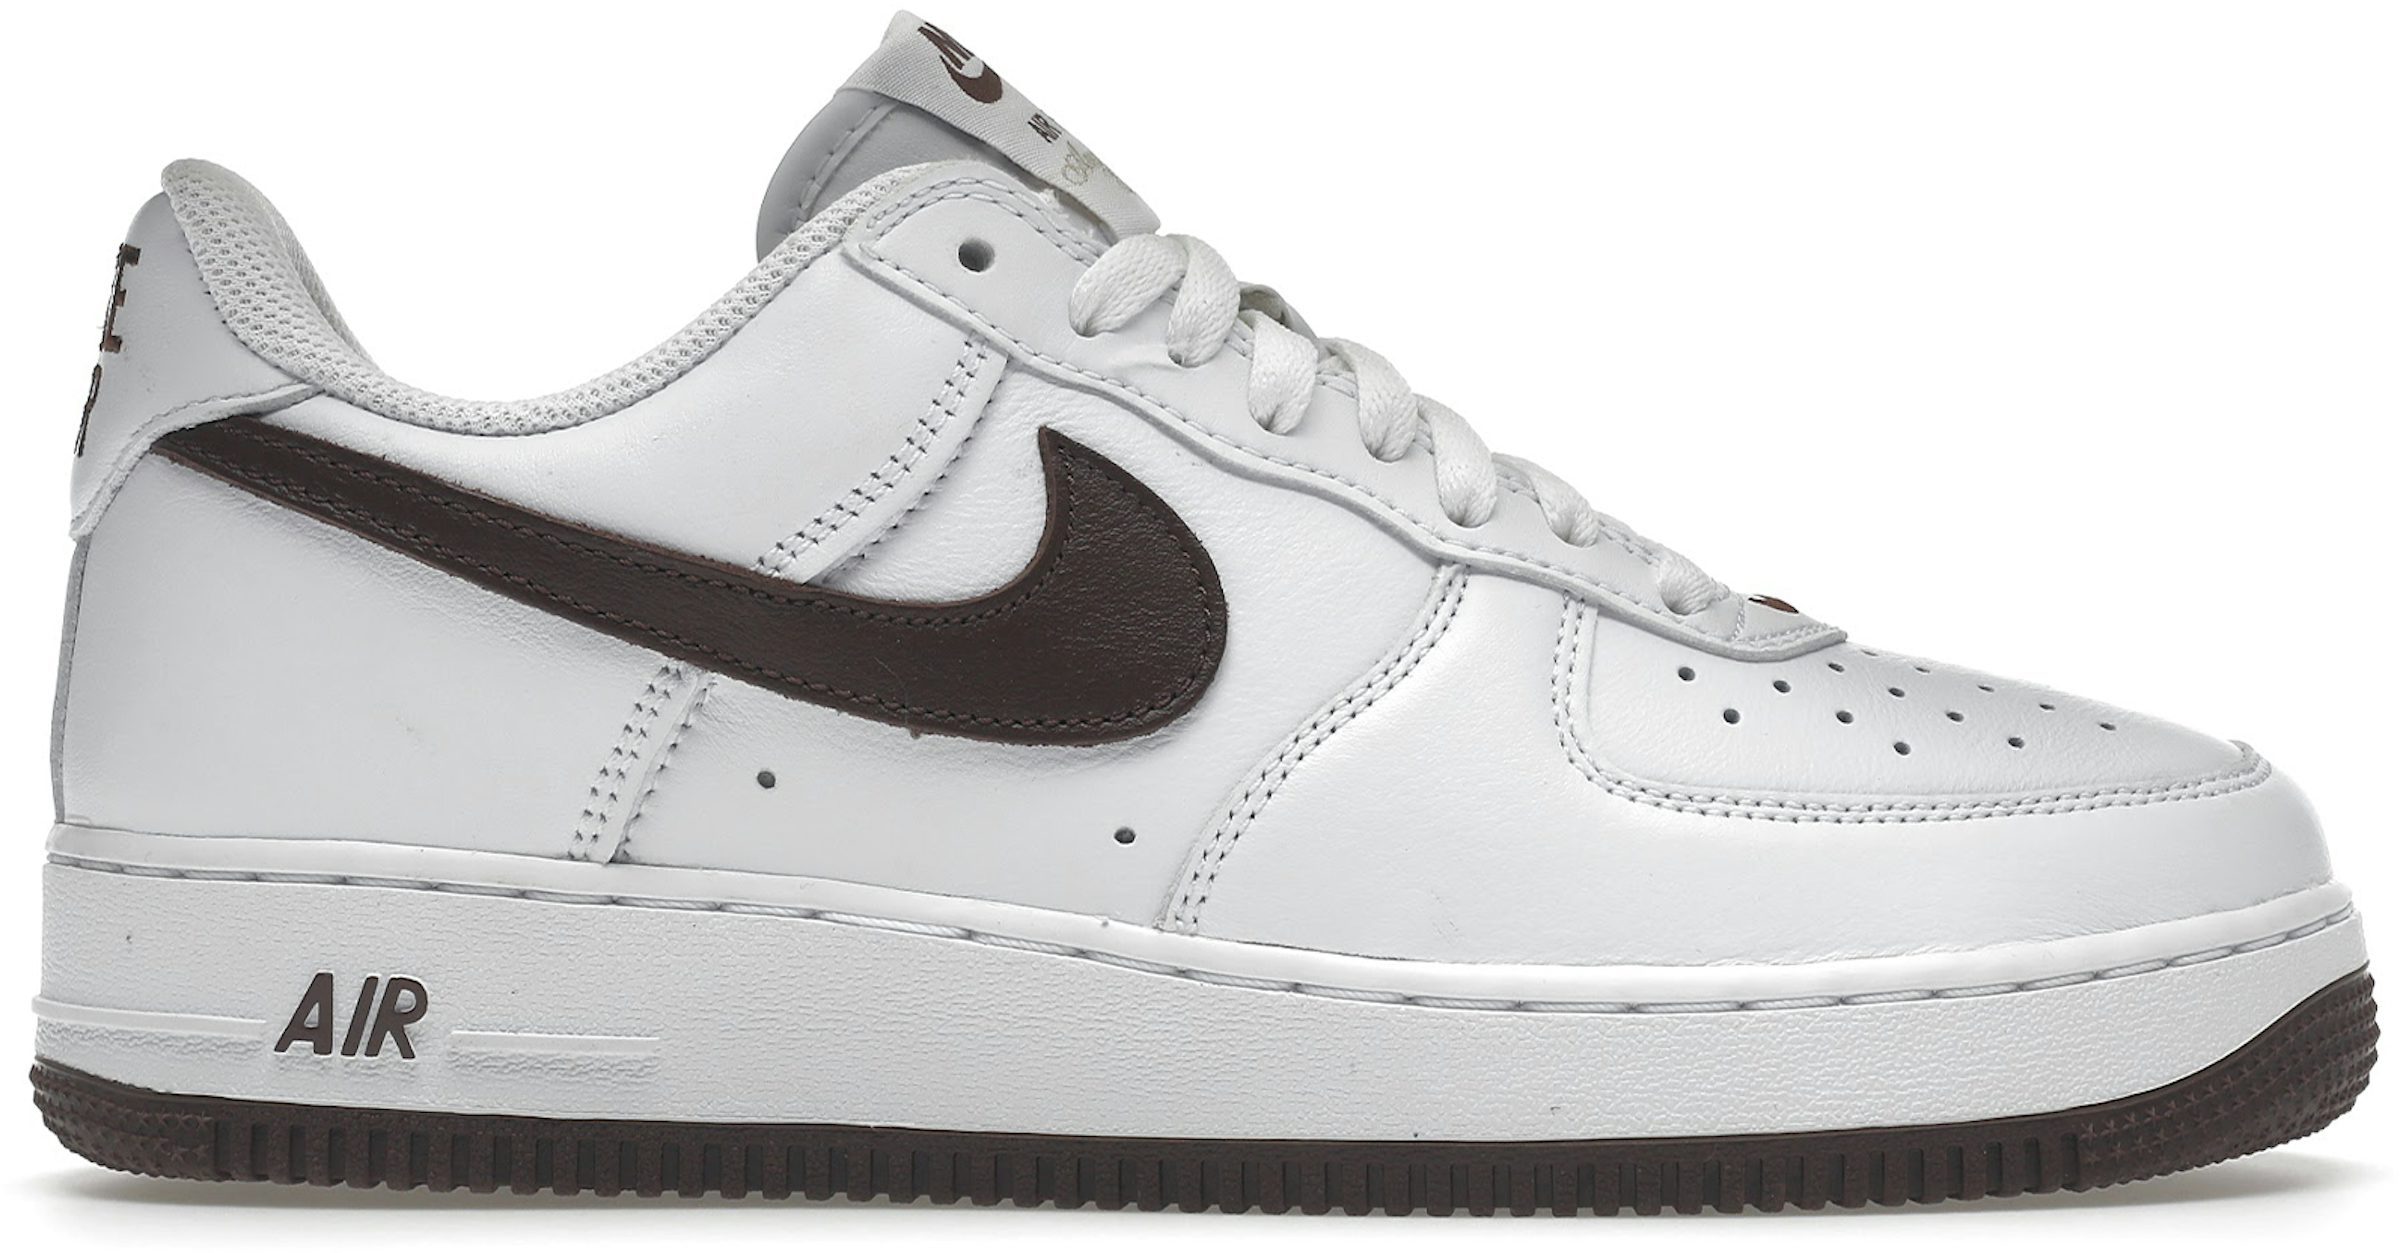 Fresh Looks at the Louis Vuitton x Nike Air Force 1 Collection By Virgil  Abloh - Sneaker News